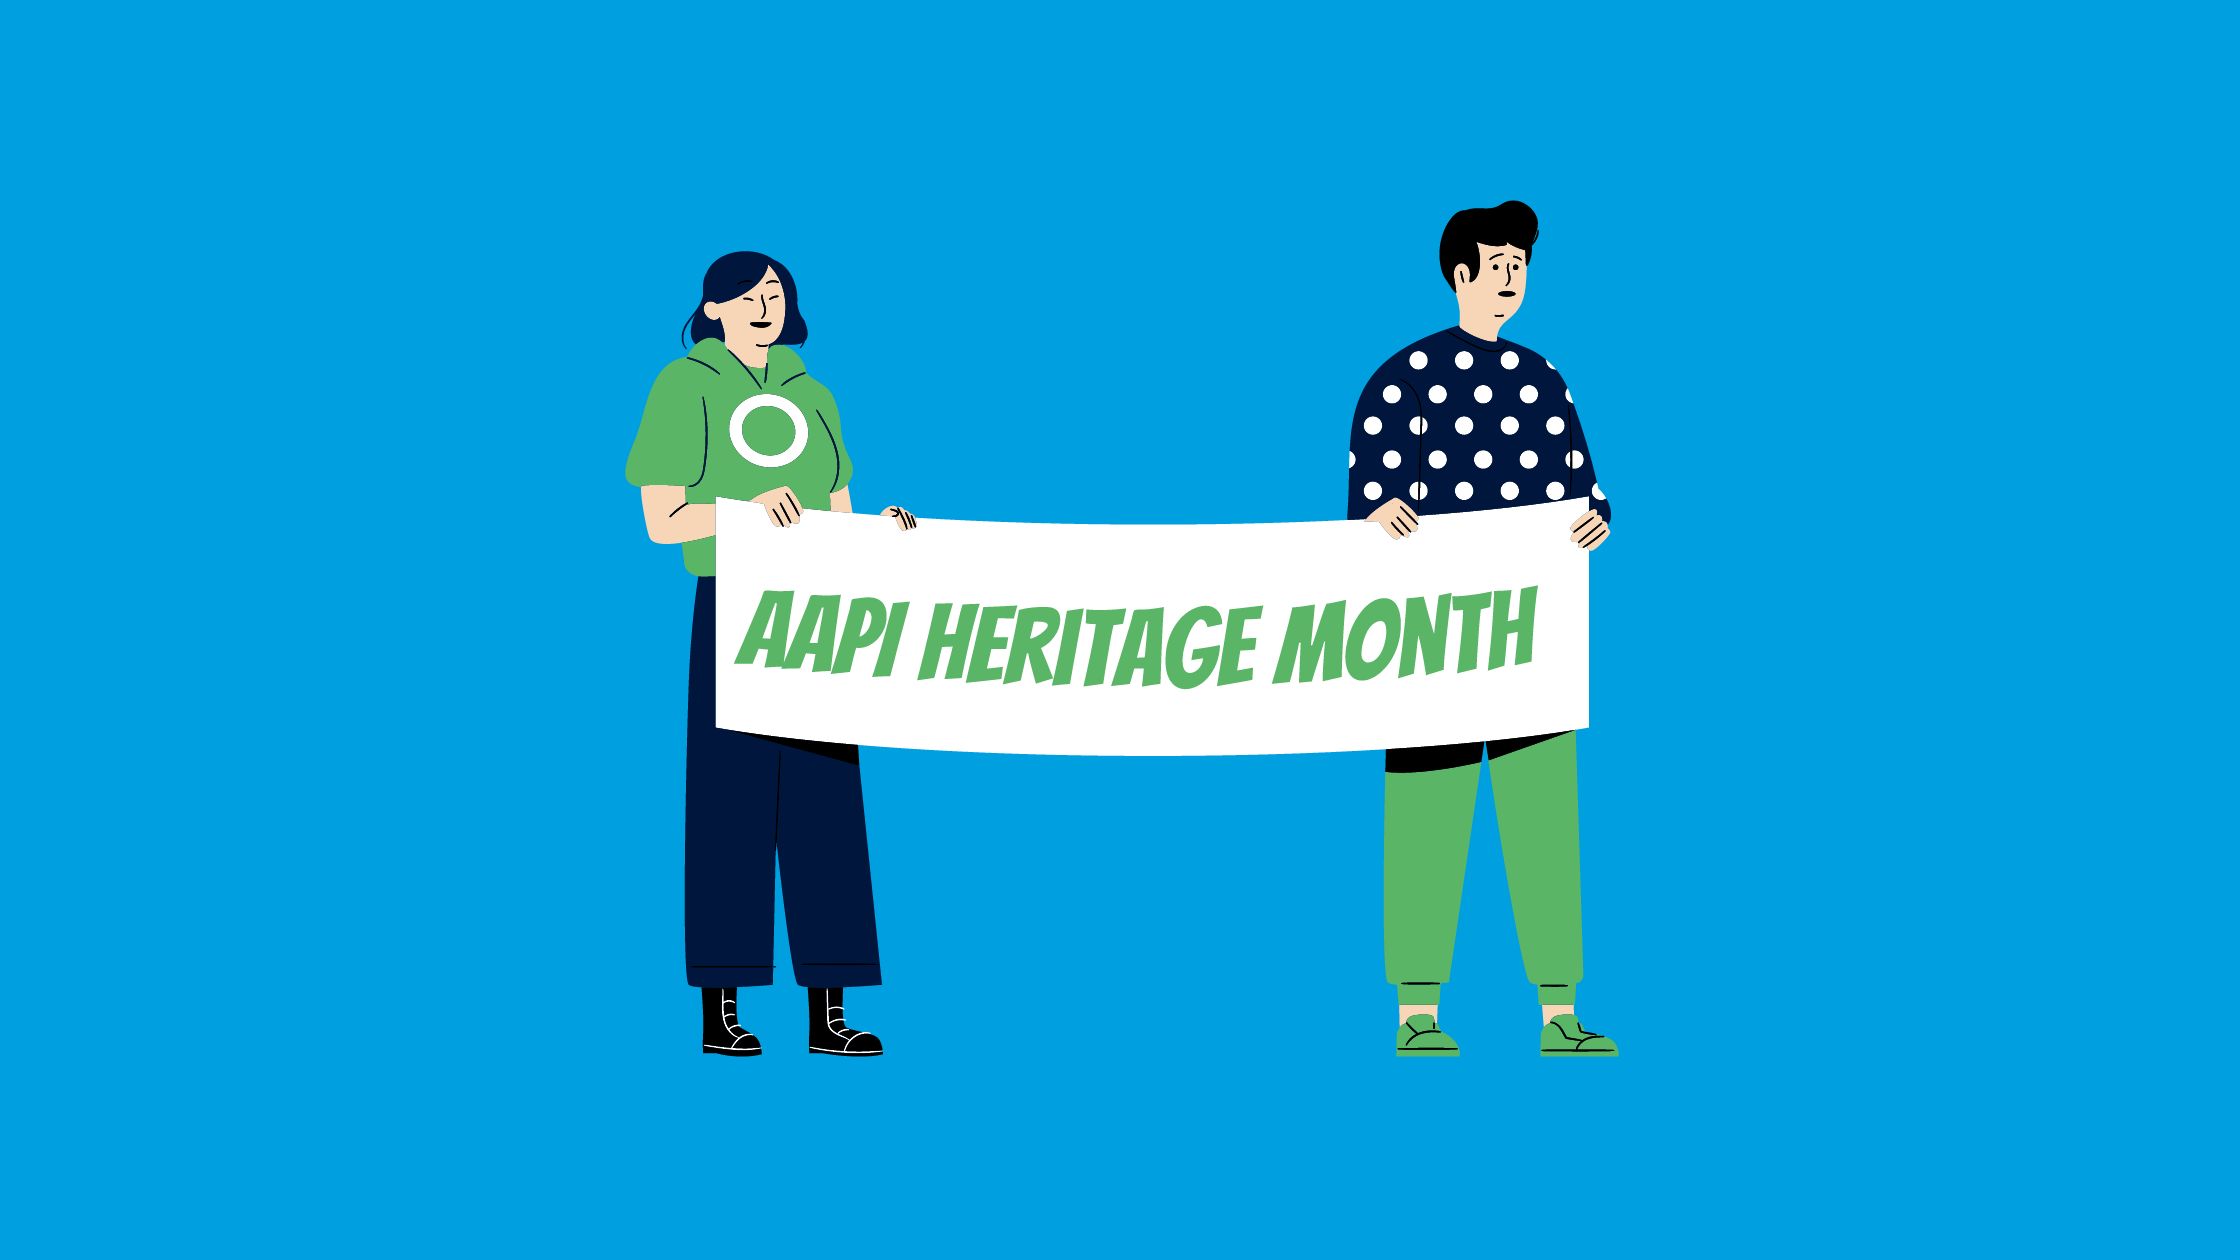 This image features two people holding up a banner that says "AAPI Heritage Month." This image represents the AAPI filmmakers blog to highlight 8 AAPI filmmakers who have revolutionized cinema.